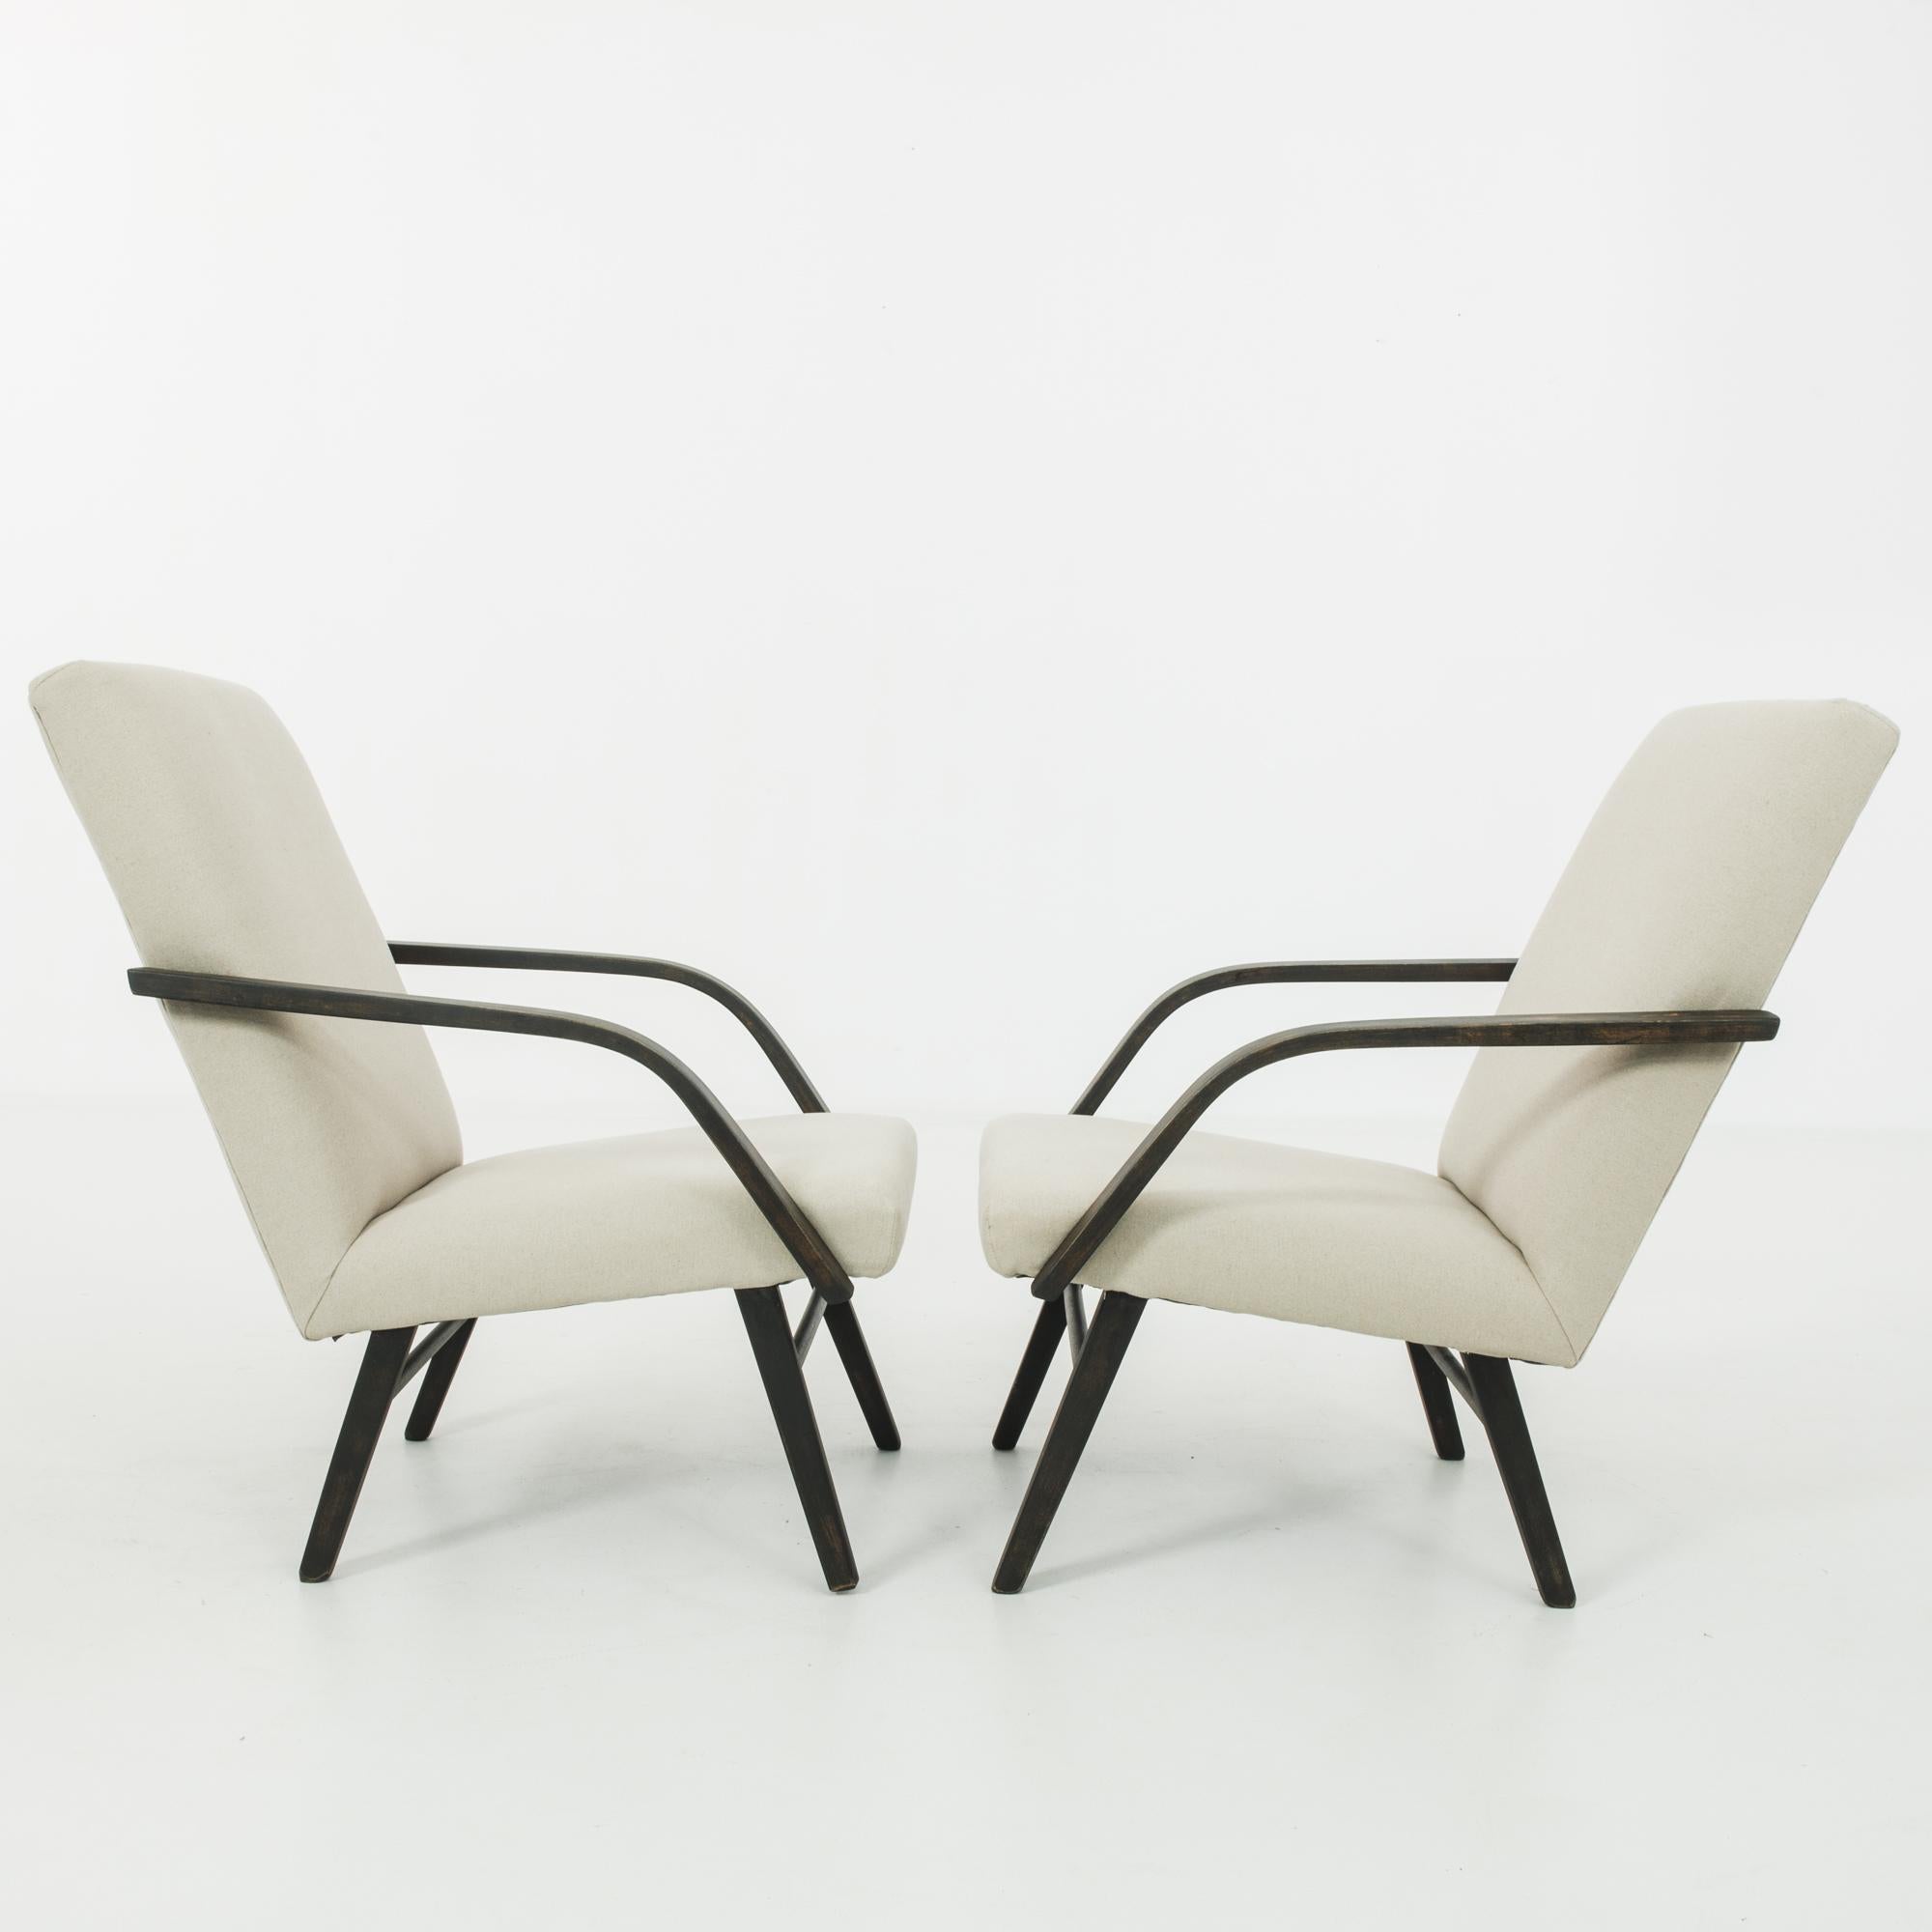 1960s Czechoslovakian Angular Upholstered Lounge Chairs, a Pair In Good Condition For Sale In High Point, NC